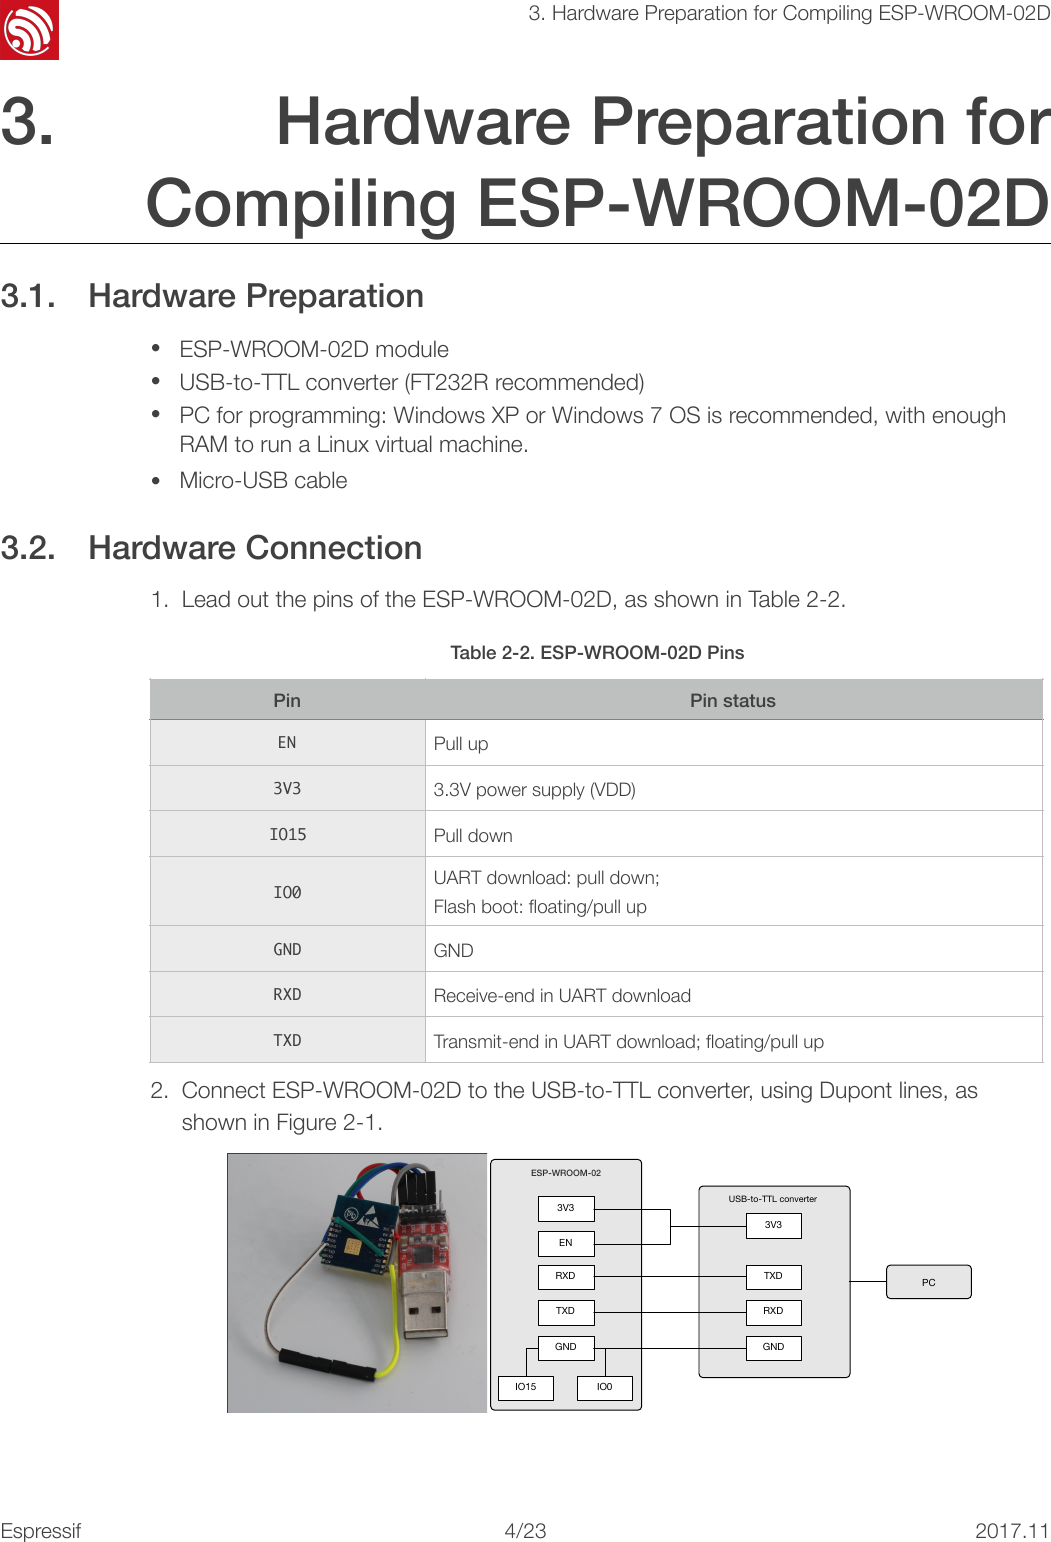 &quot;3. Hardware Preparation for Compiling ESP-WROOM-02D3. Hardware Preparation for Compiling ESP-WROOM-02D 3.1. Hardware Preparation •ESP-WROOM-02D module •USB-to-TTL converter (FT232R recommended) •PC for programming: Windows XP or Windows 7 OS is recommended, with enough RAM to run a Linux virtual machine. •Micro-USB cable 3.2. Hardware Connection 1. Lead out the pins of the ESP-WROOM-02D, as shown in Table 2-2. 2. Connect ESP-WROOM-02D to the USB-to-TTL converter, using Dupont lines, as shown in Figure 2-1. ! !  Table 2-2. ESP-WROOM-02D PinsPinPin statusENPull up3V33.3V power supply (VDD)IO15Pull downIO0UART download: pull down; Flash boot: ﬂoating/pull upGNDGNDRXDReceive-end in UART downloadTXDTransmit-end in UART download; ﬂoating/pull upEN3V3ESP-WROOM-023V3TXDRXDTXDRXDGNDGNDIO15 IO0USB-to-TTL converterPCEspressif&quot;/&quot;4 232017.11